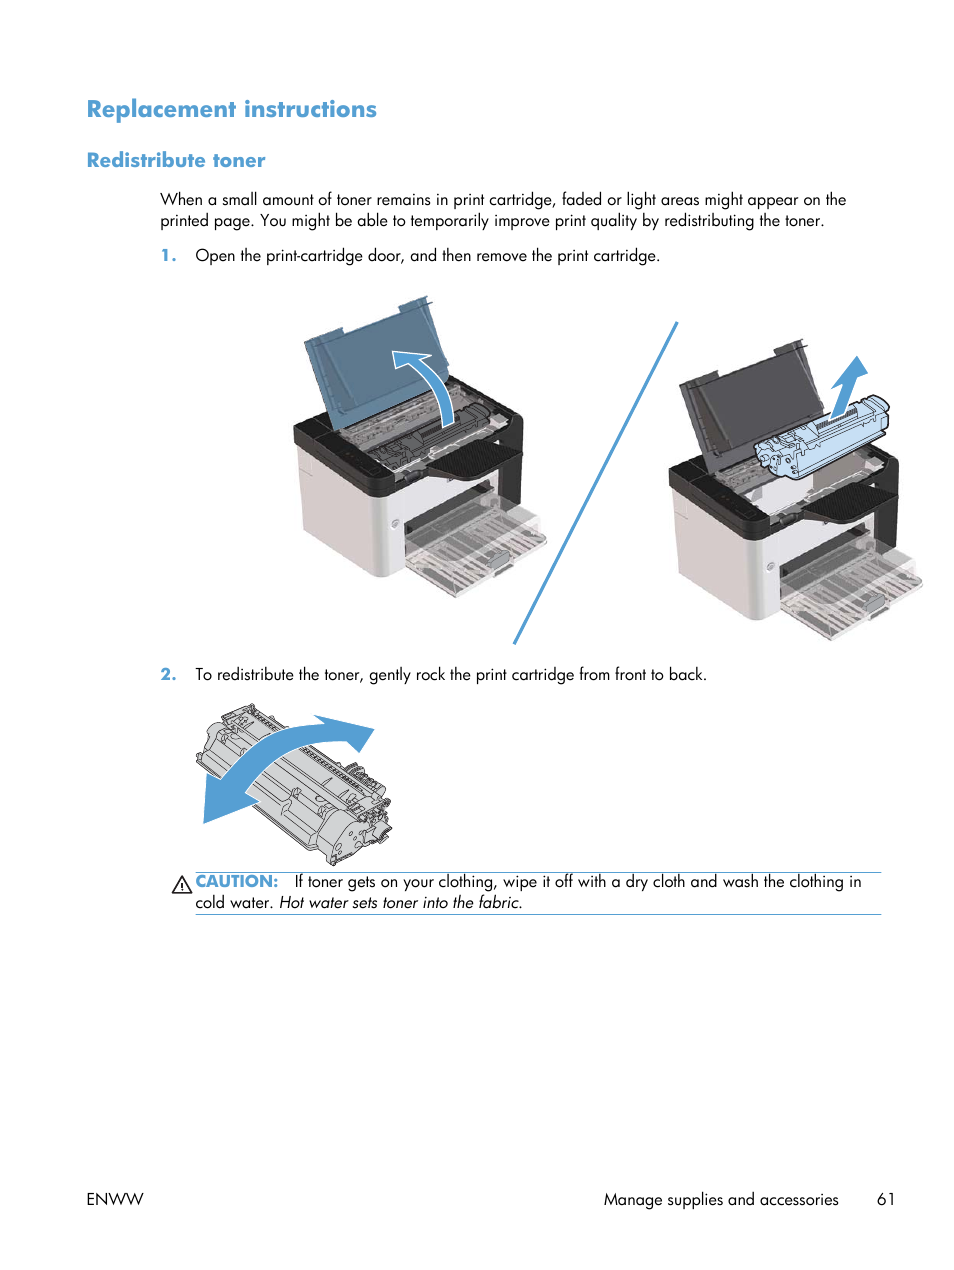 Replacement instructions, Redistribute toner | HP Laserjet p1606dn User Manual | Page 73 / 152